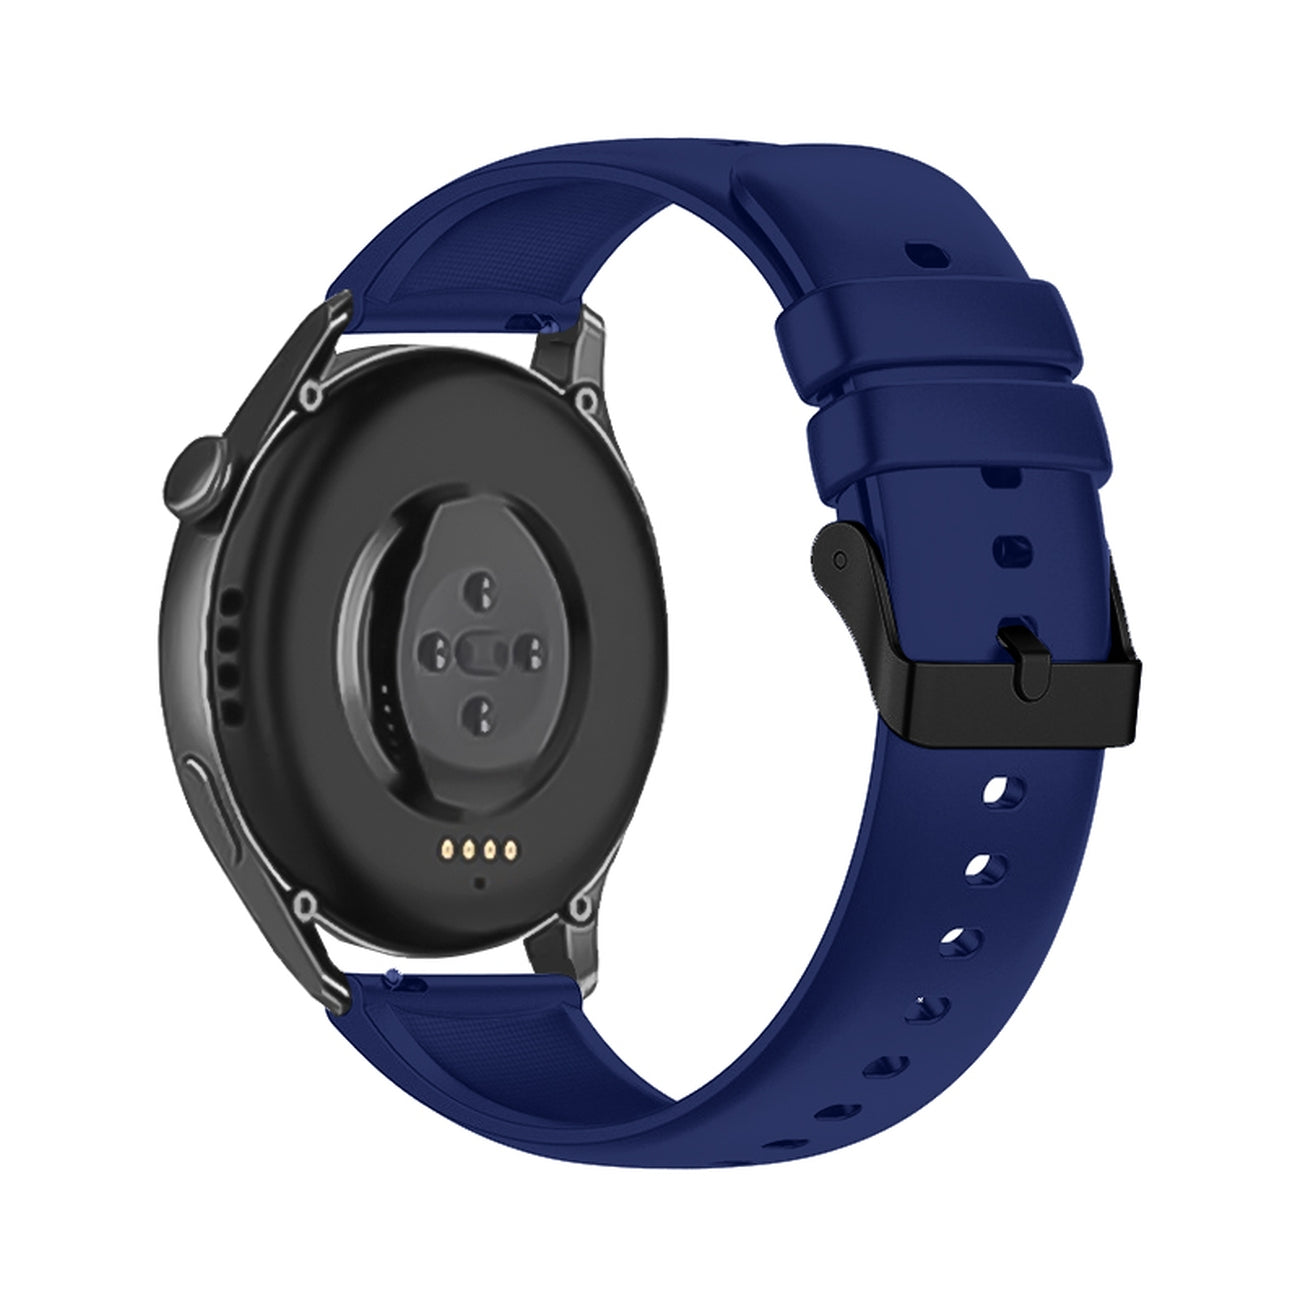 Strap One silicone band strap bracelet bracelet for Huawei Watch GT 3 42 mm navy blue